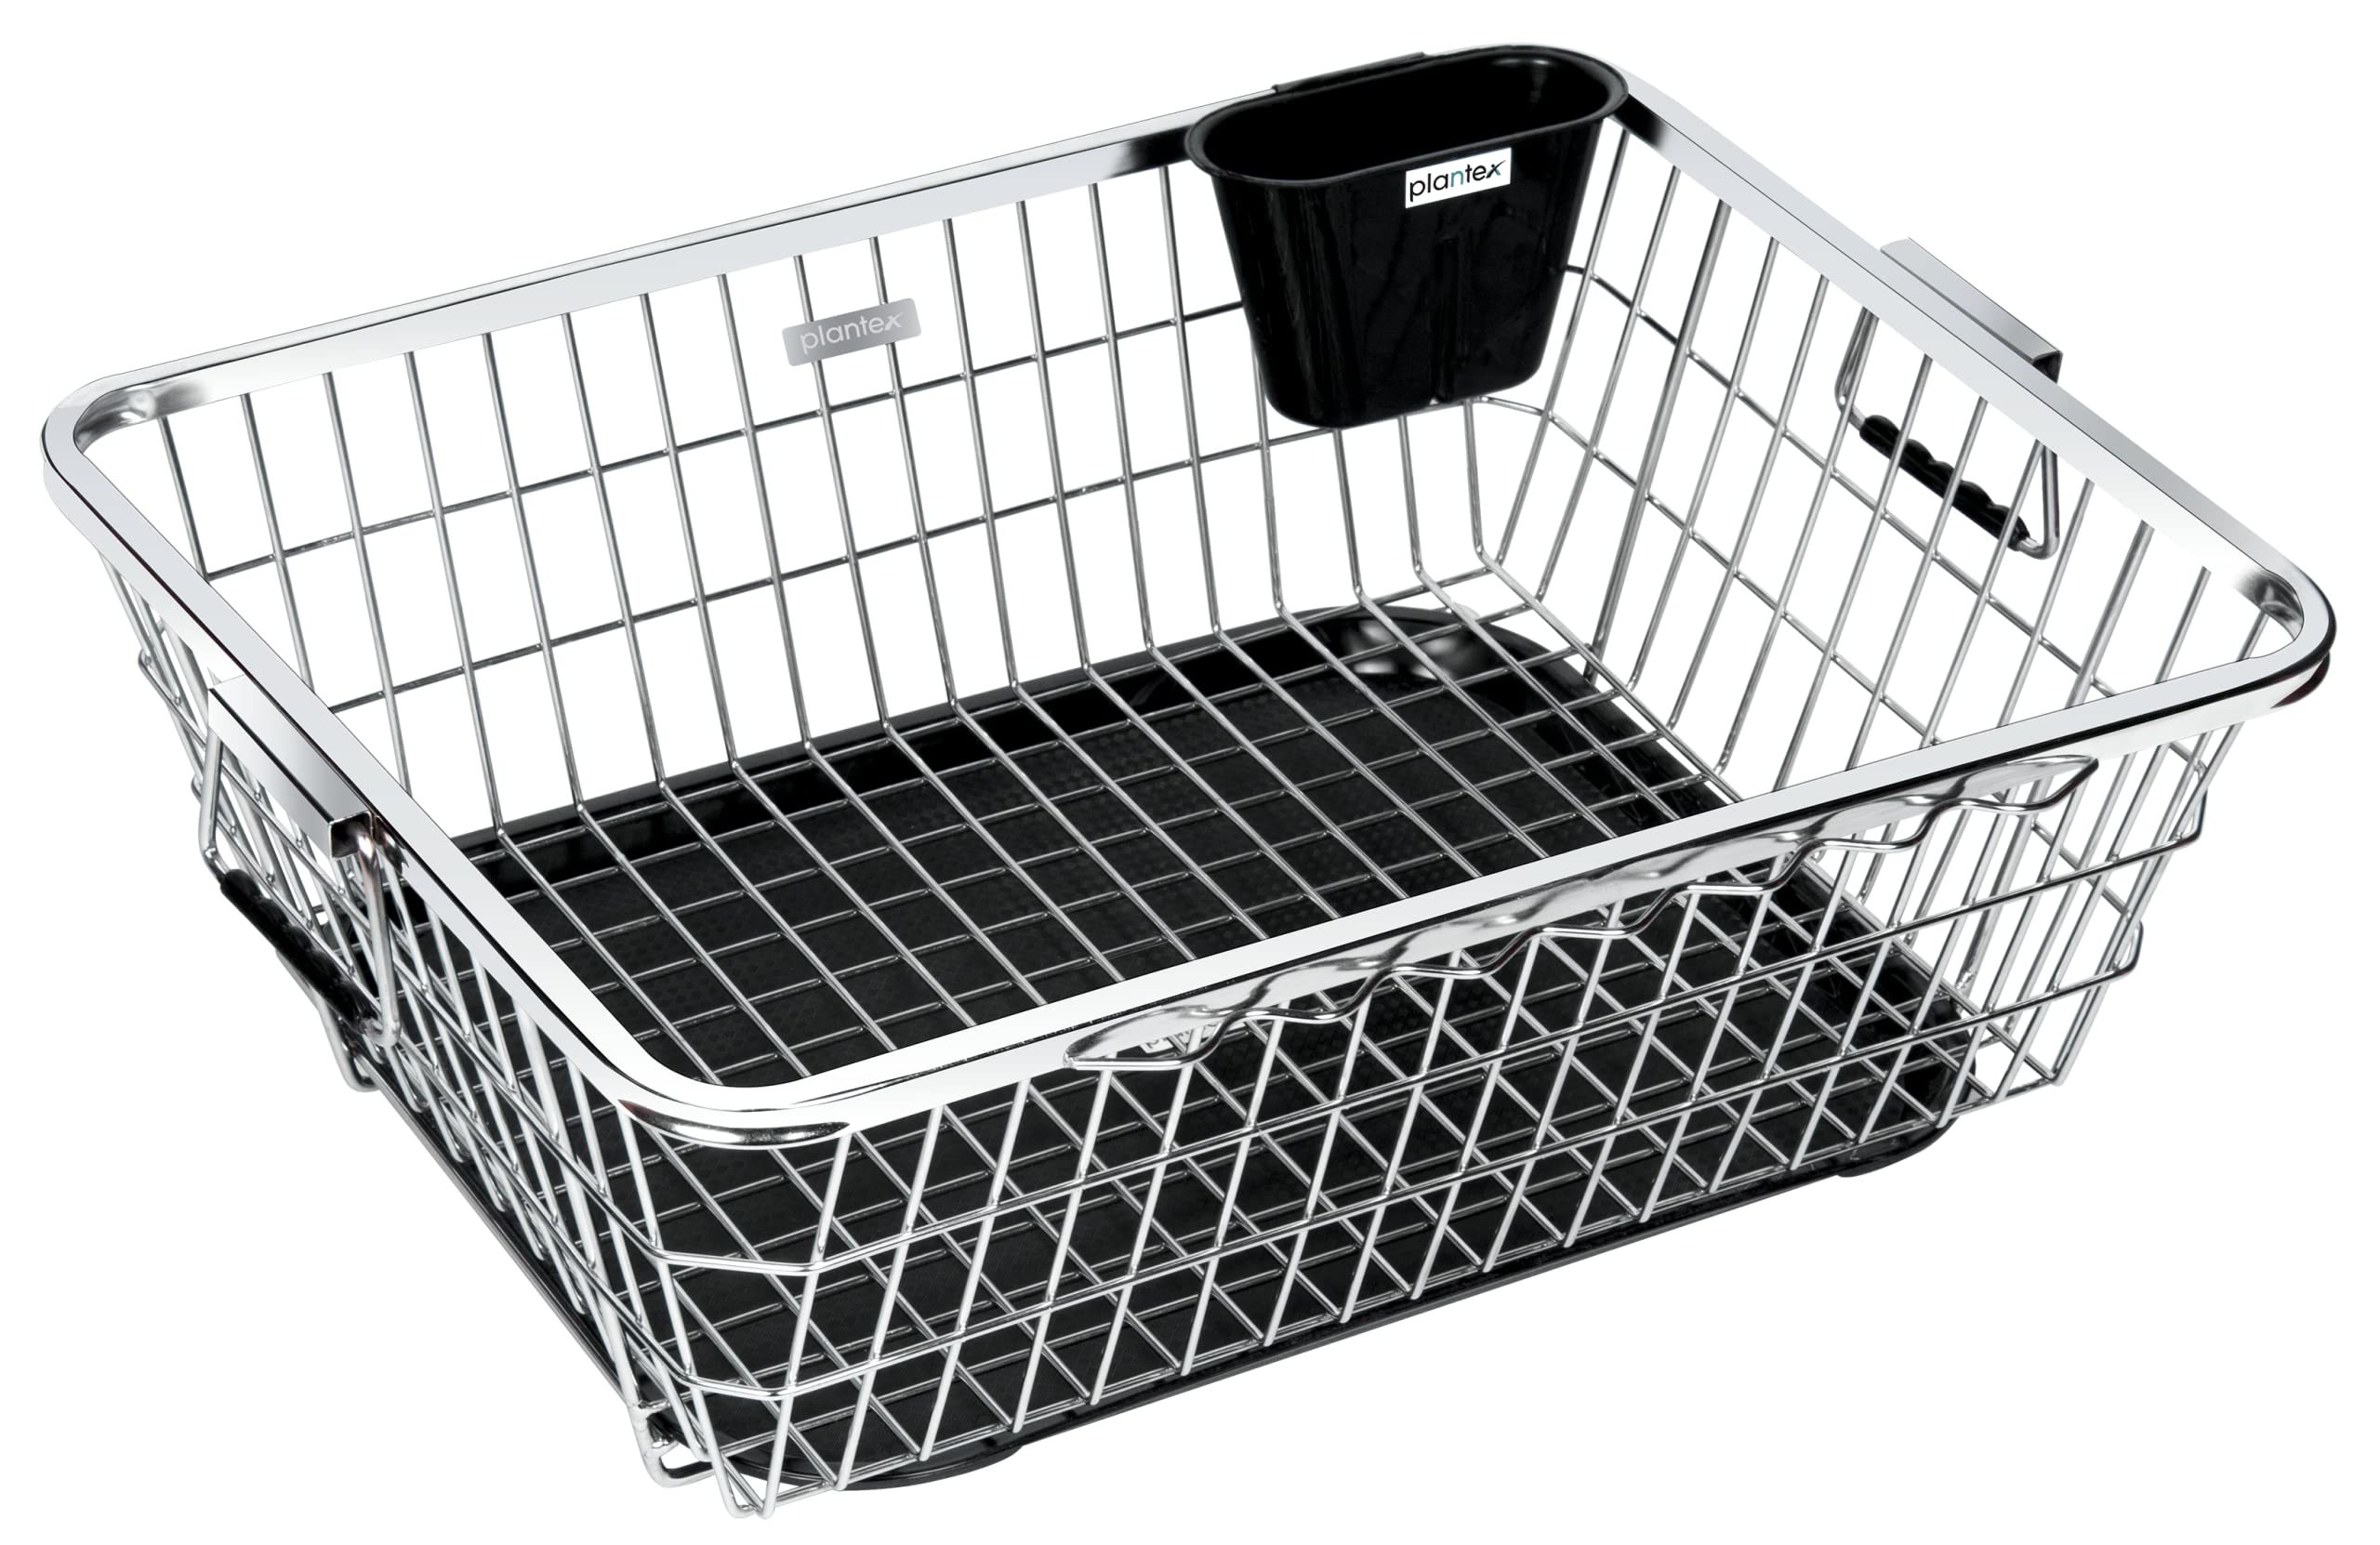 Plantex Stainless Steel Dish Drainer Basket for Kitchen Utensils/Dish Drying Rack with Drainer/Bartan Basket/Plate Stand (Size-54 x 40 x 24 cm/Chrome Finish)